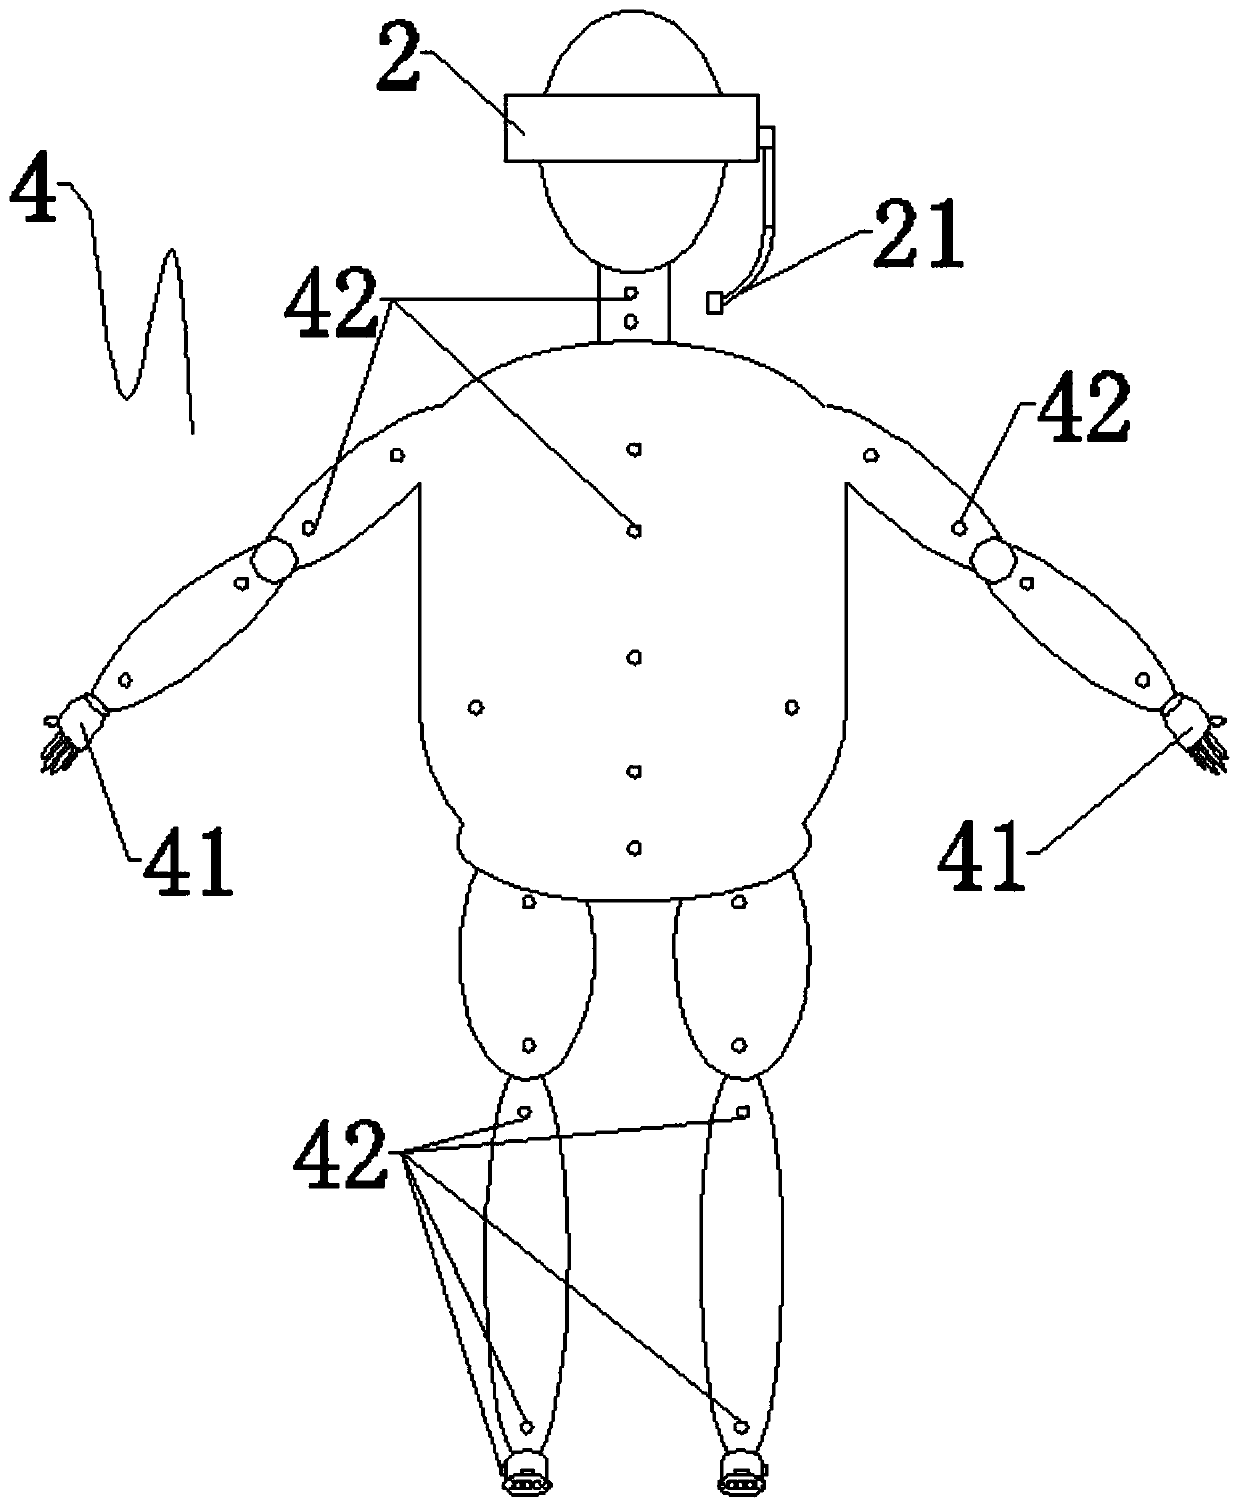 Cerebral stroke limb function evaluation and rehabilitation training system and method